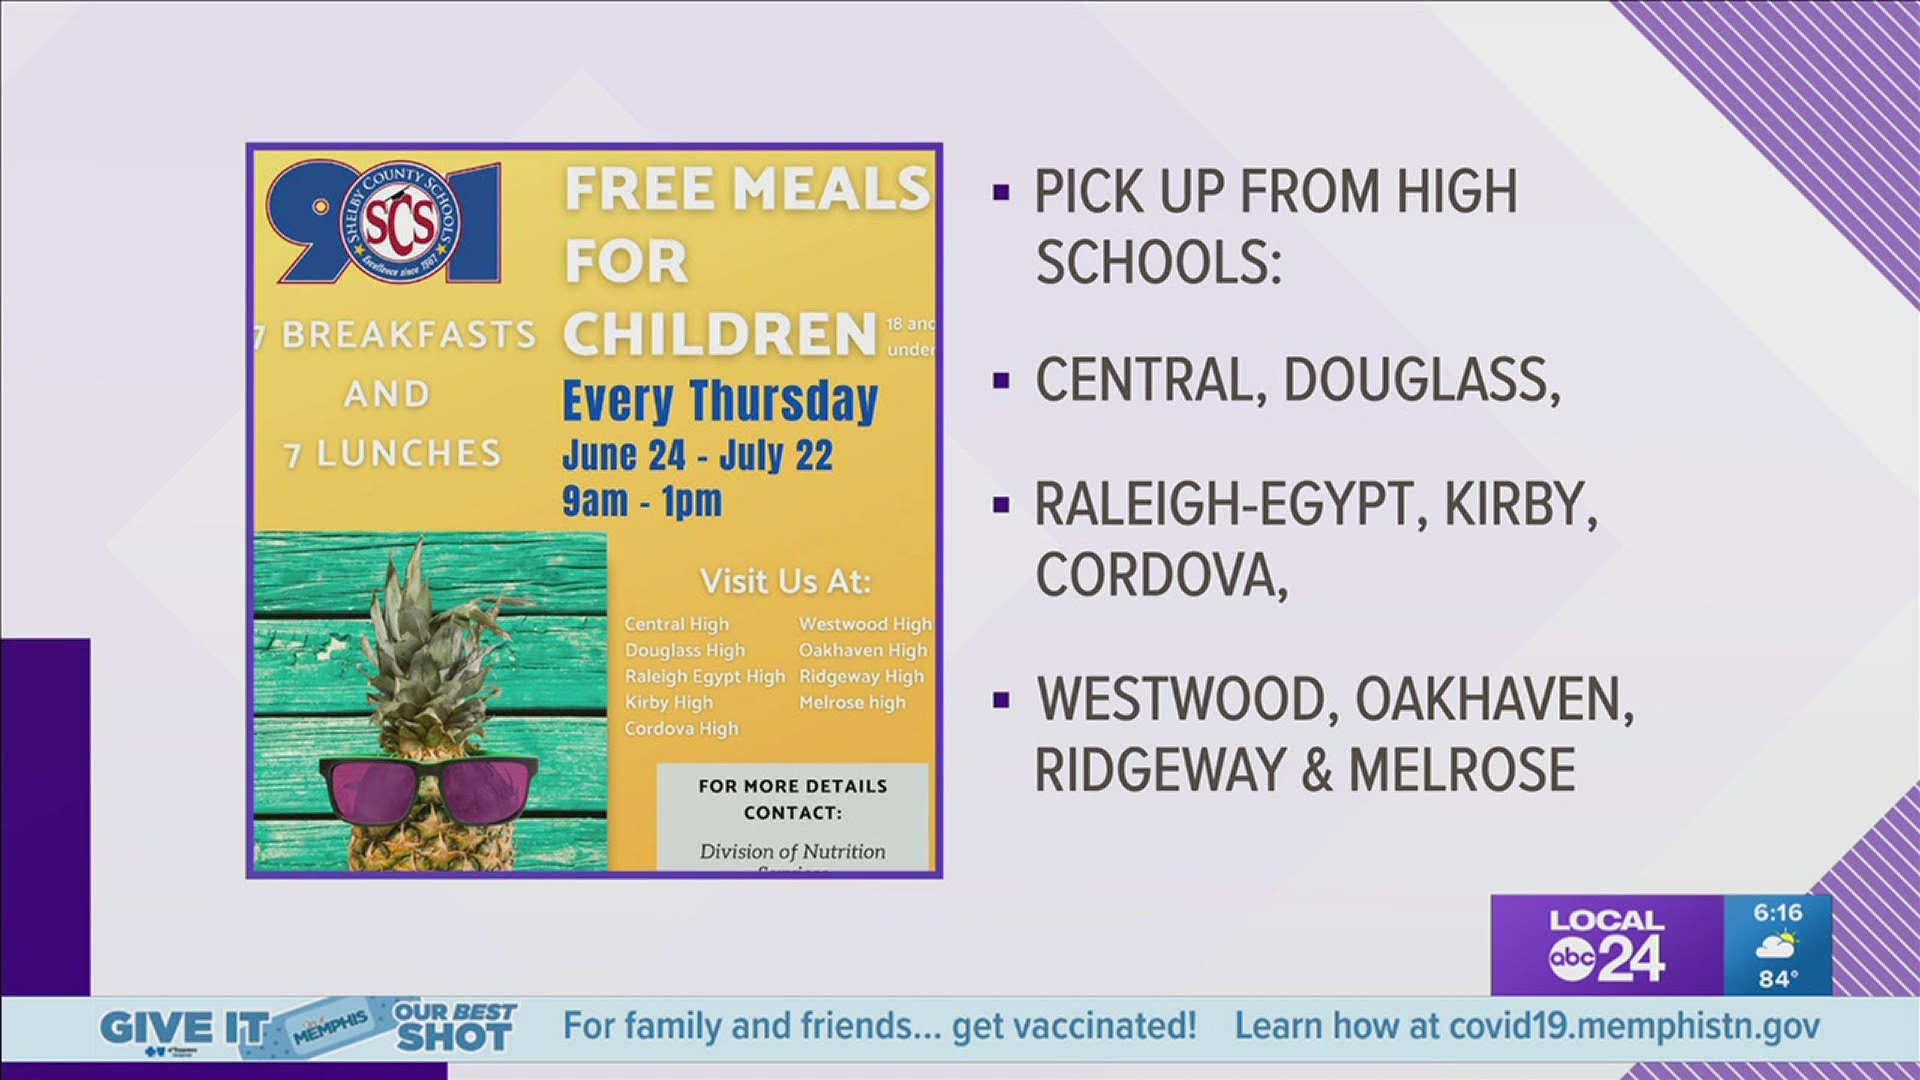 Meal pickup is every Thursday from 9am to 1pm until July 22nd.